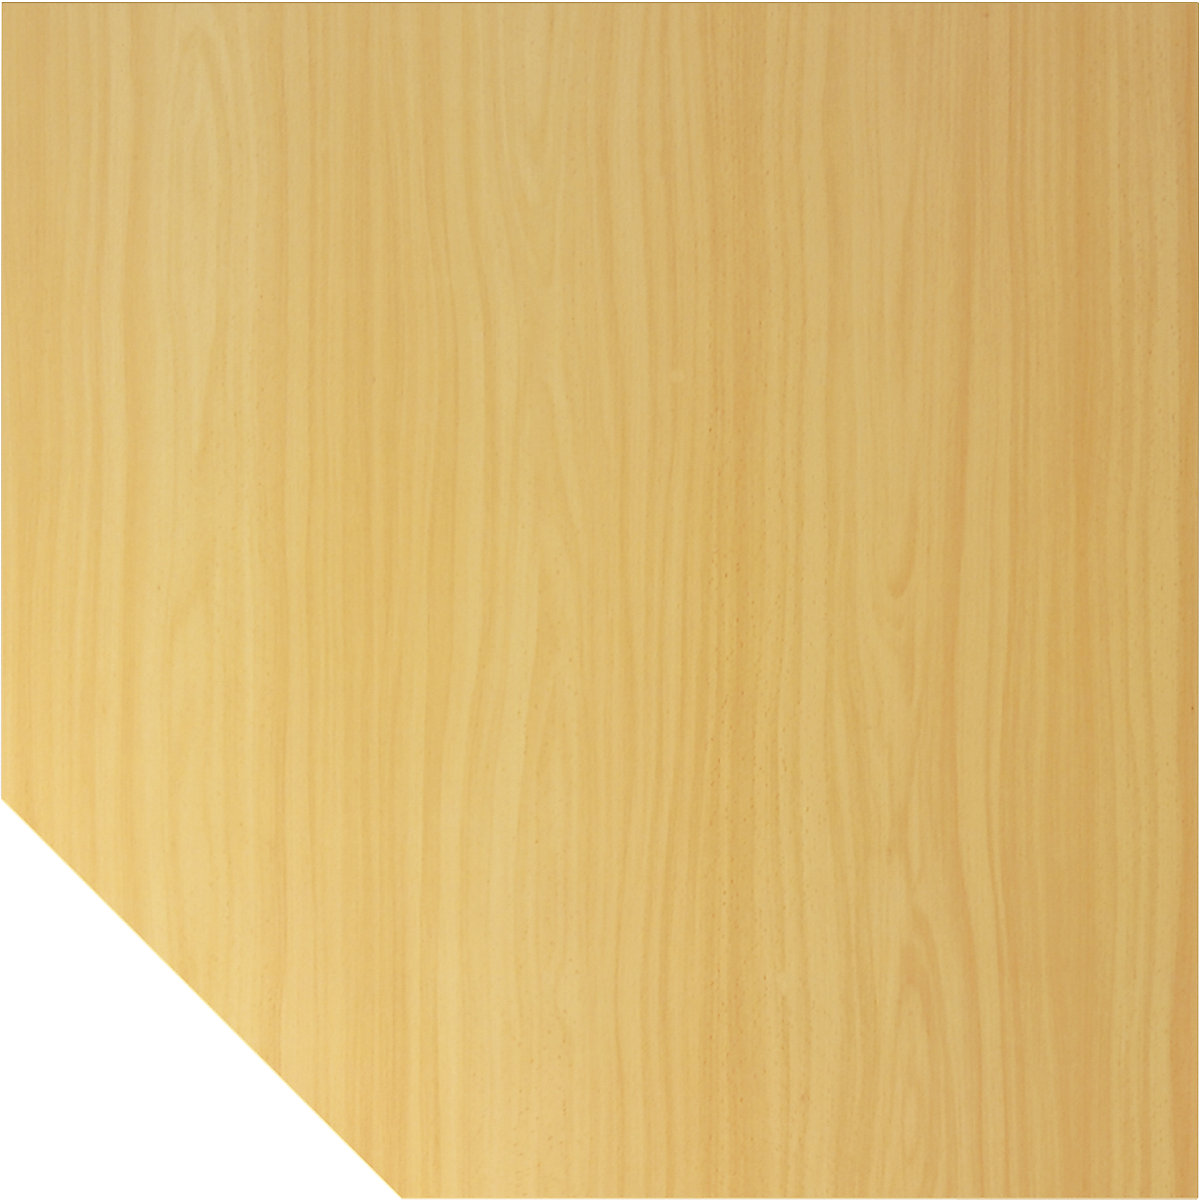 Linking top BIANCA, trapezoid corner panel with support foot, beech finish-5